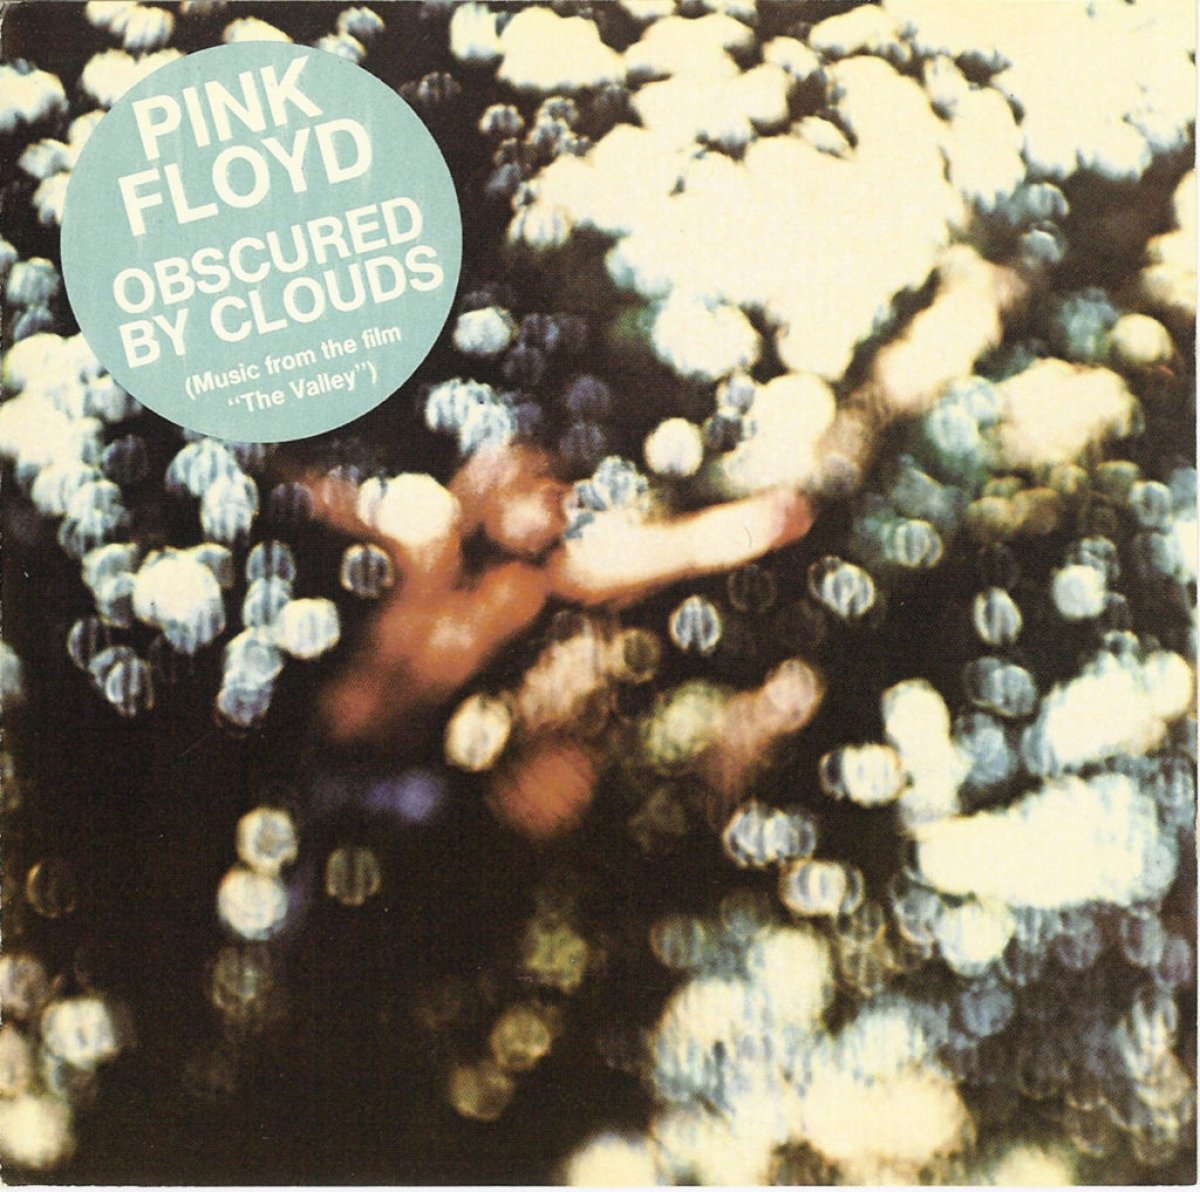 ‘Obscured by Clouds’ - Pink Floyd